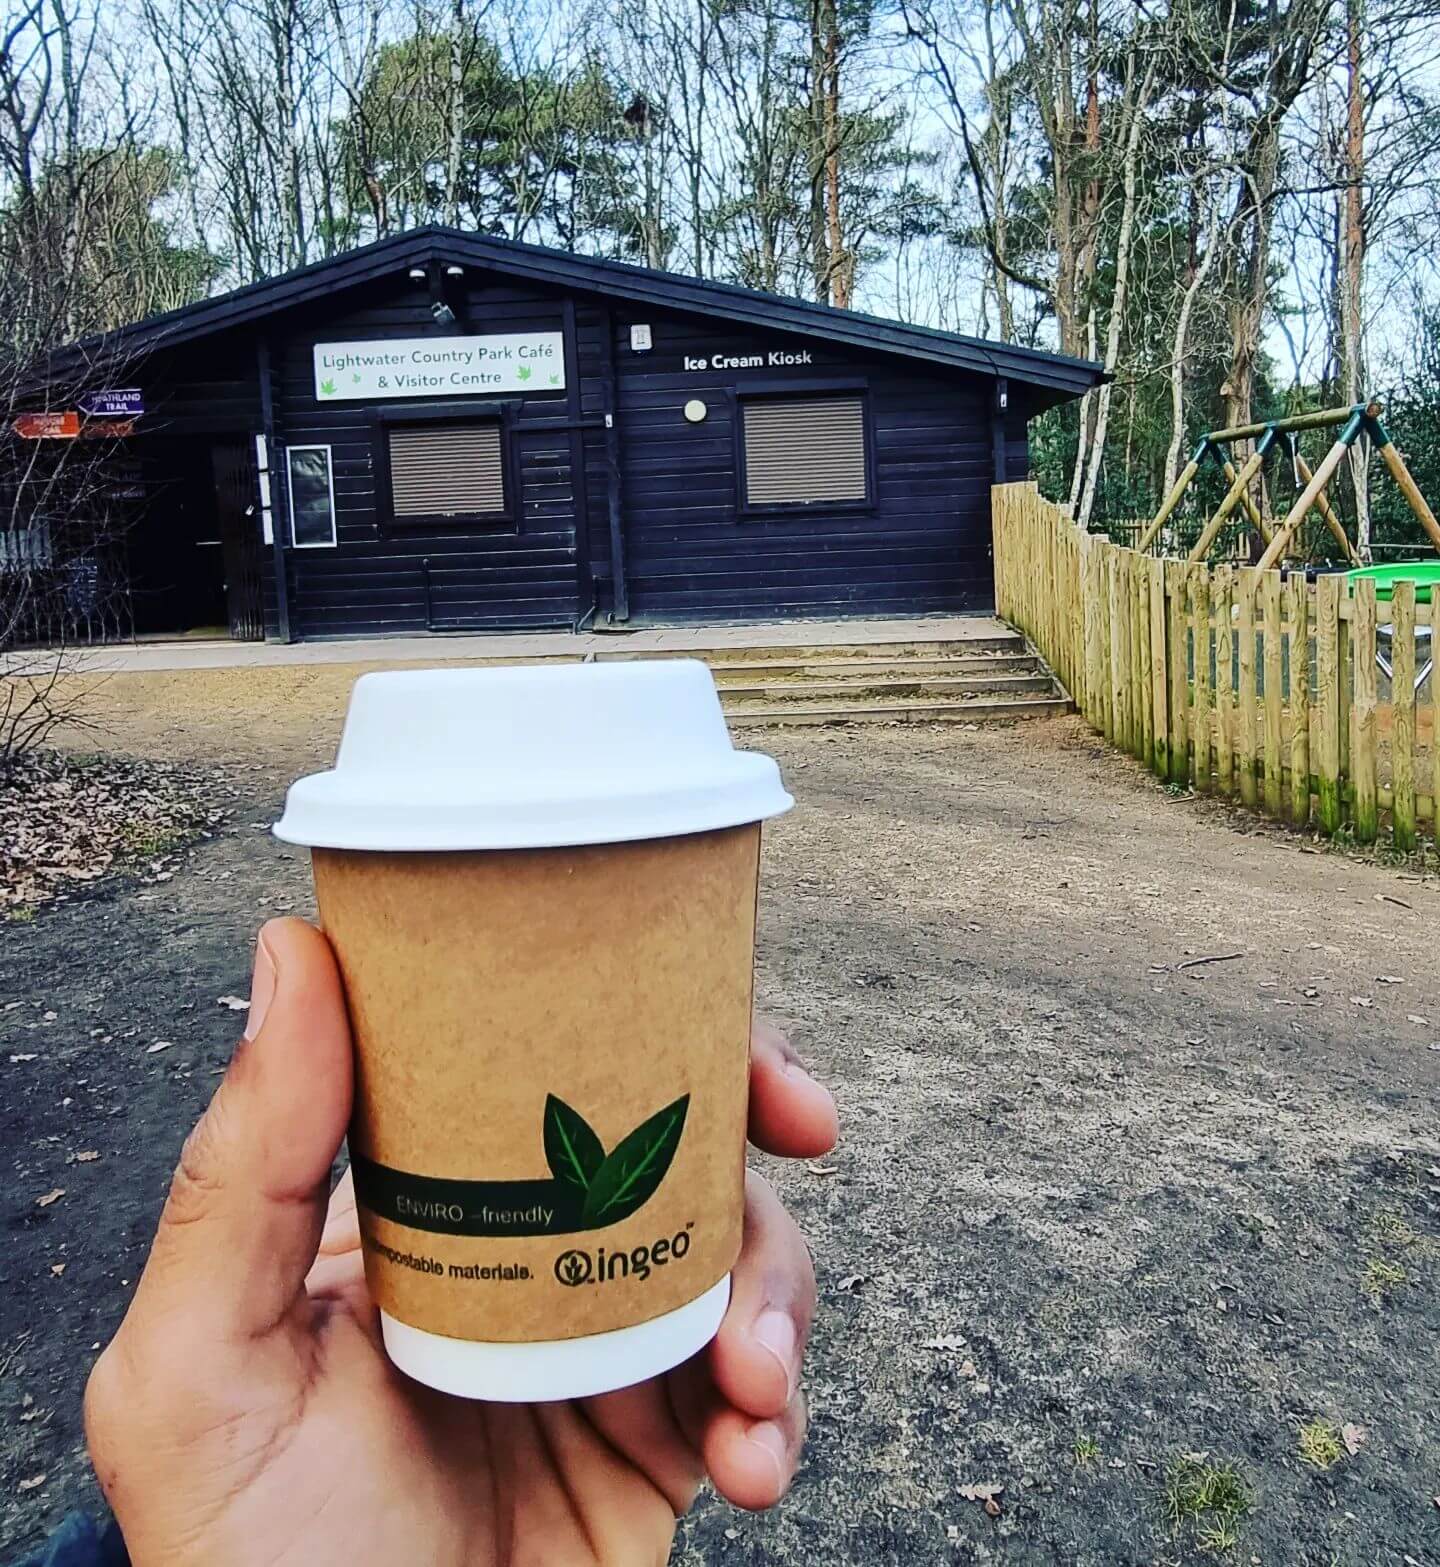 Lightwater Country Park Cafe, Surrey